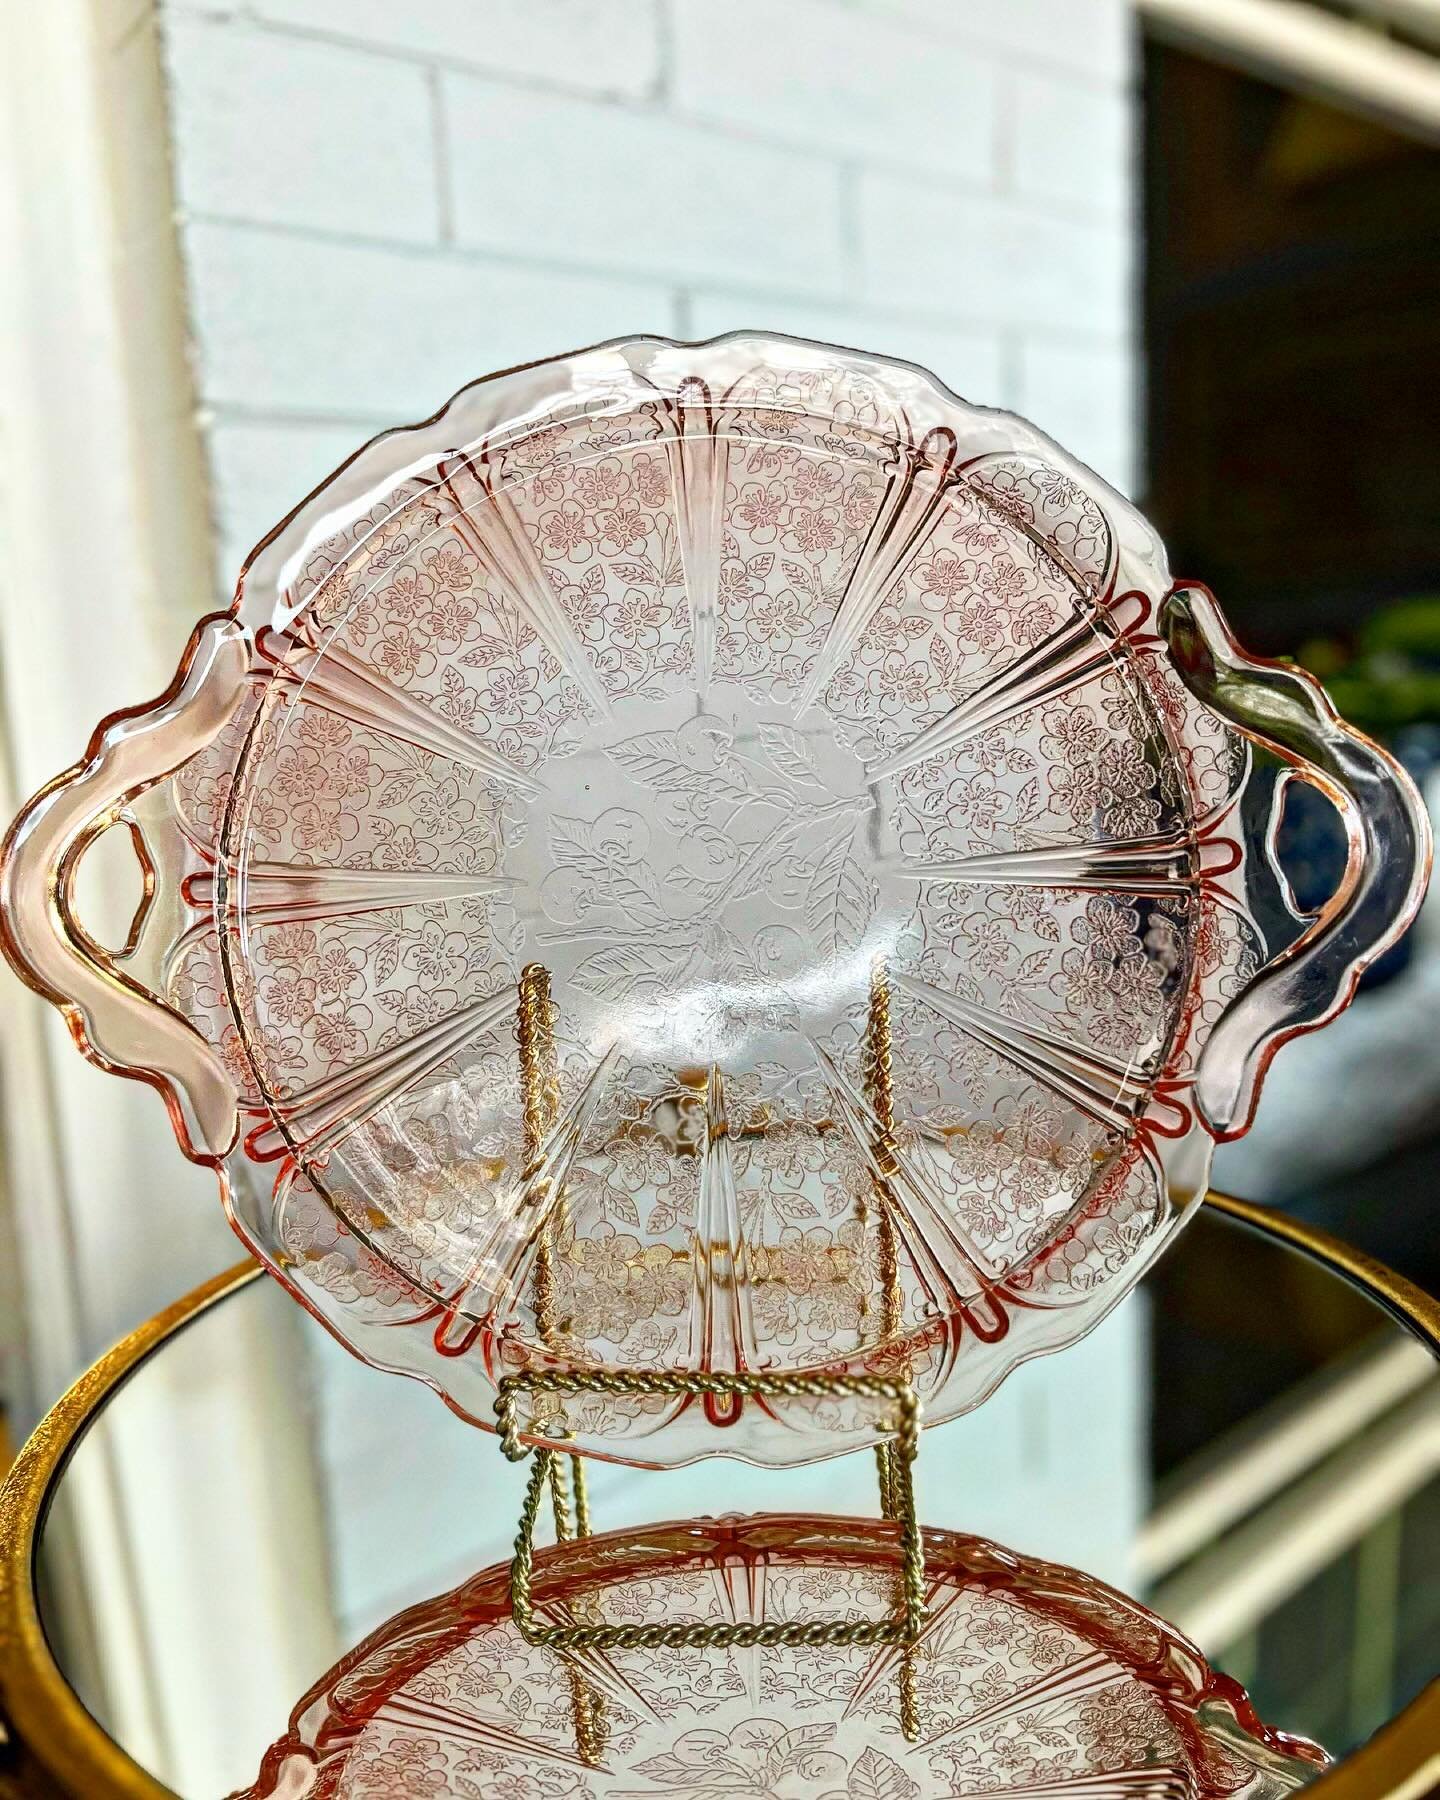 Happy Easter weekend! This Jeanette Cherry Blossom Pink Depression Glass Serving Tray has me feeling Springtime! 🌸

Available for $50. DM to purchase!

#pinkglass #vintageglassware #pinkvintage #springvibes #vintageglasscollection #vintage